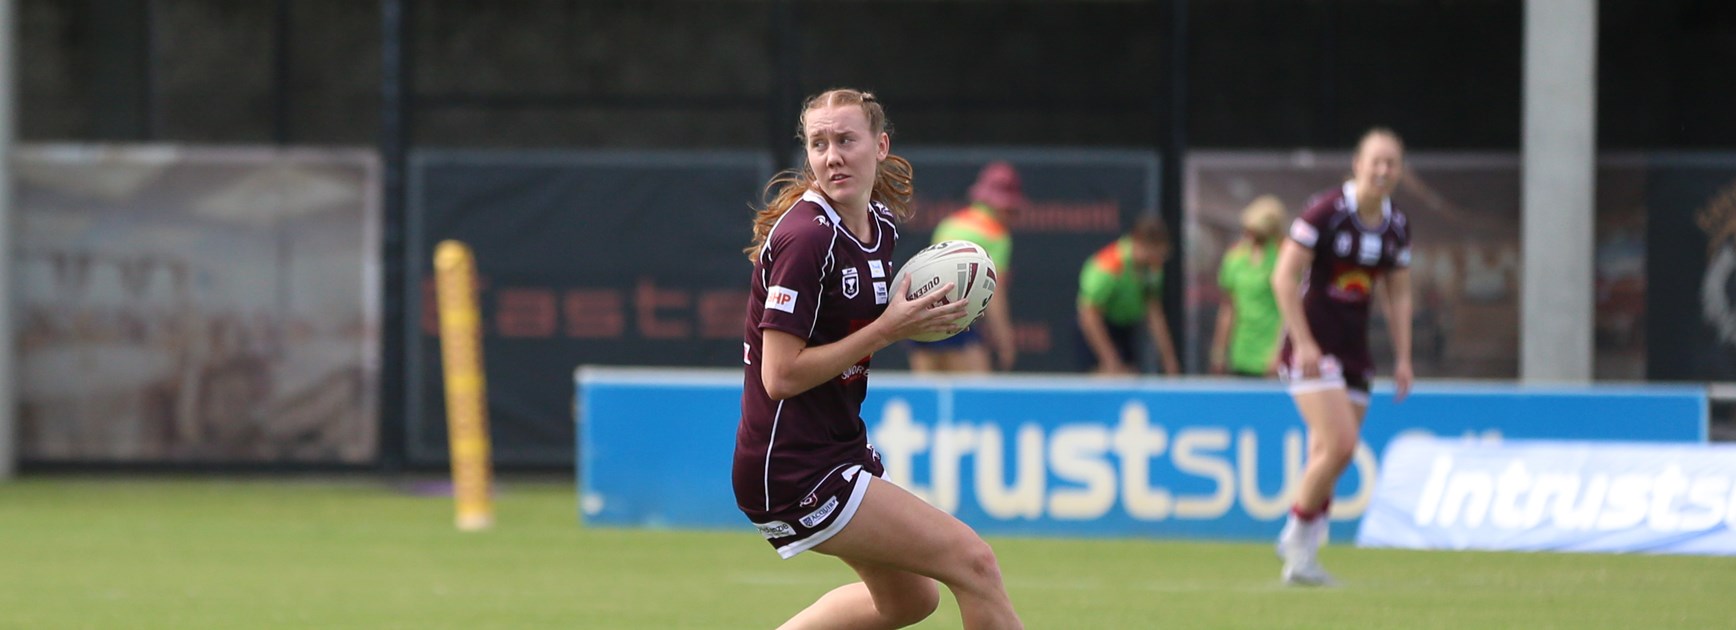 Upton stars in her Bears debut as Burleigh down Tigers